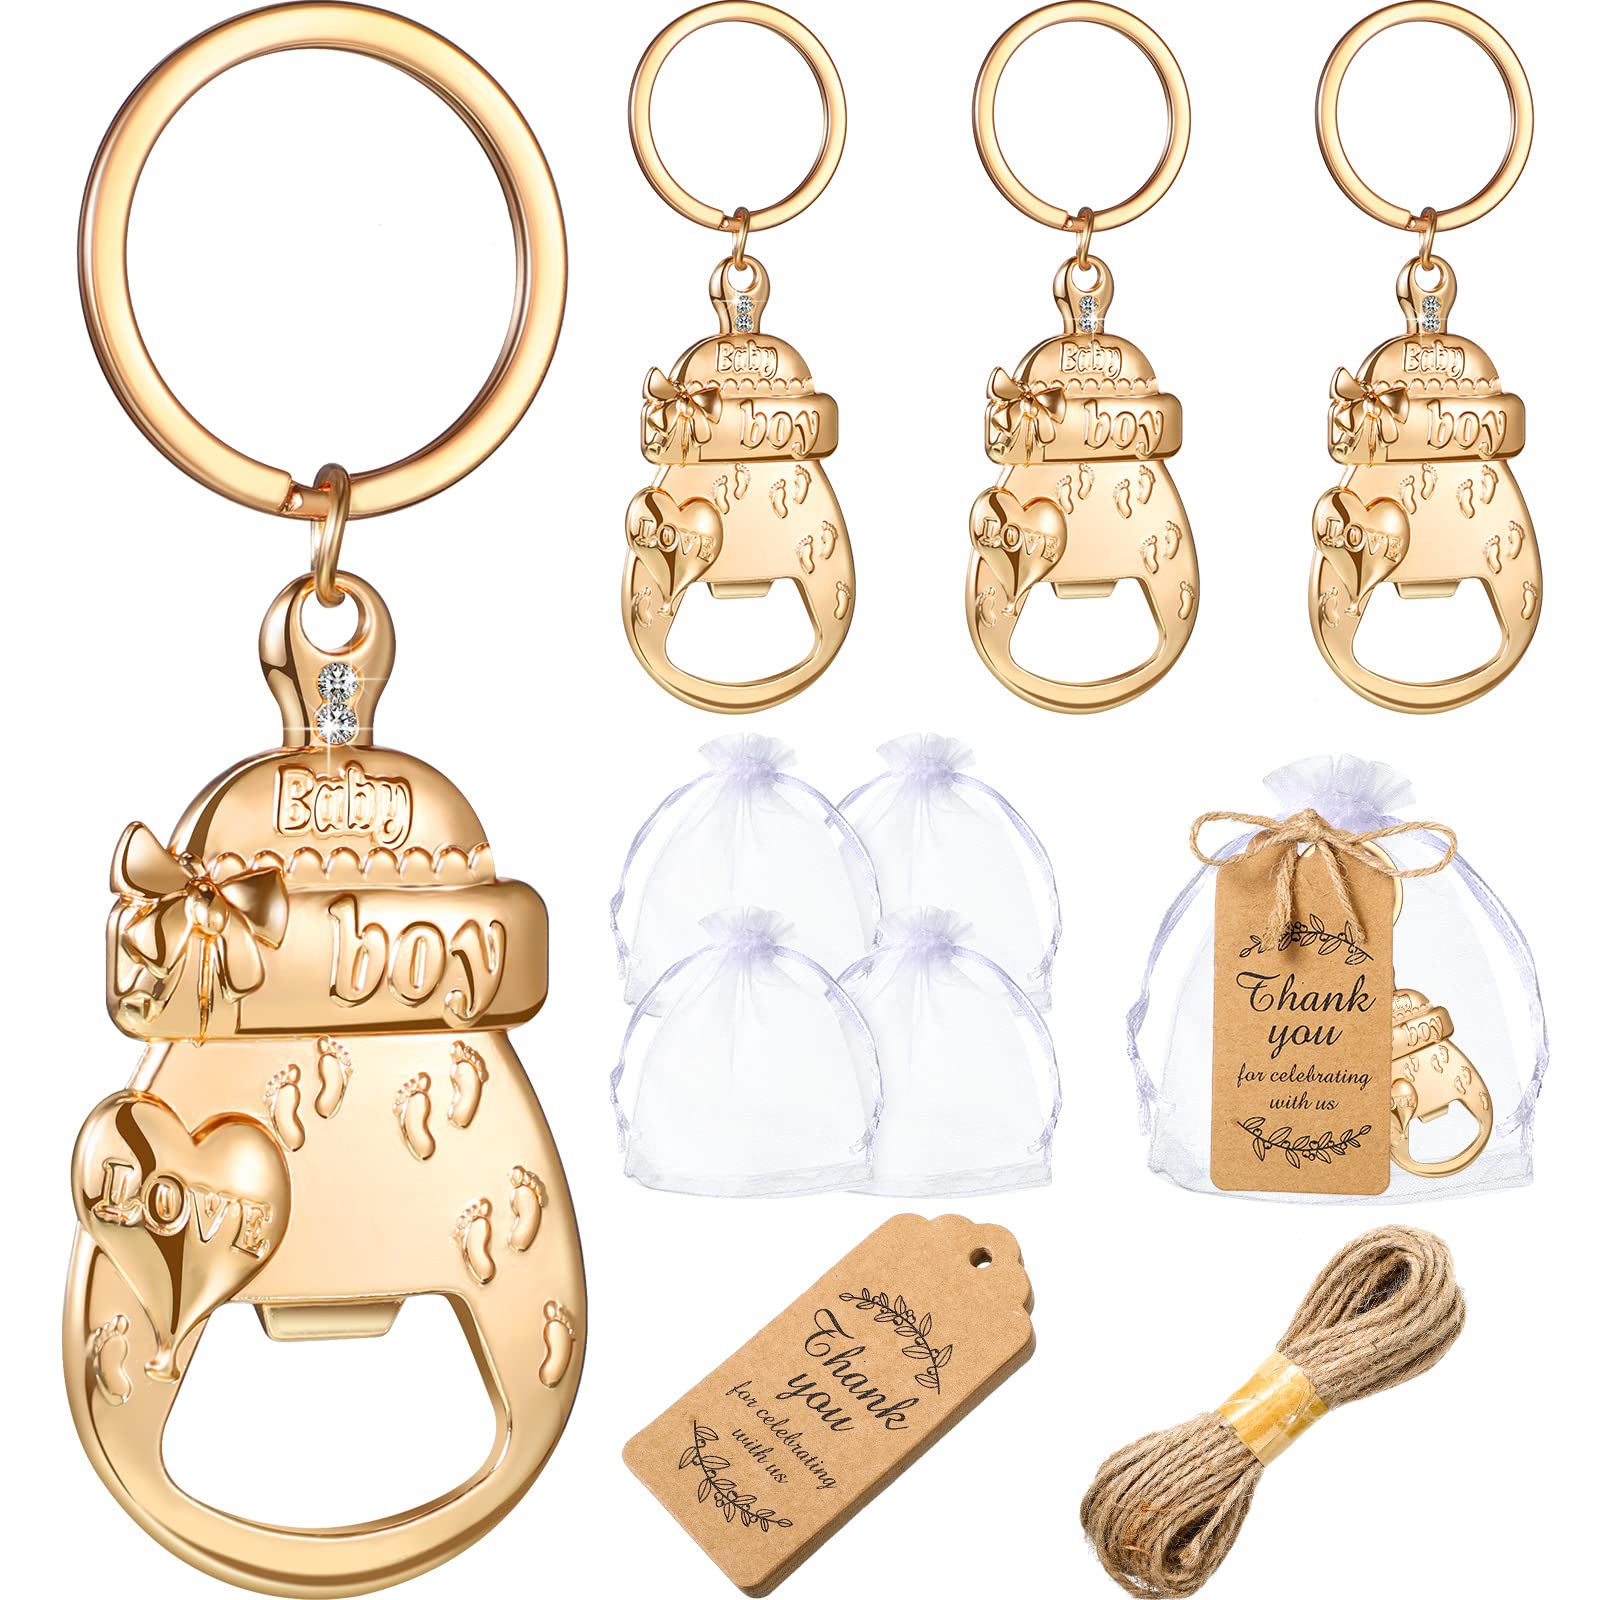 30 Sets Boy Baby Bottle Opener Baby Shower Party Favor with 30 White Organza Bags and 30 Thank You Cards Cute Baby Shower Return Gifts for Guest Wedding Souvenir Kids Birthday Party Supplies, Gold